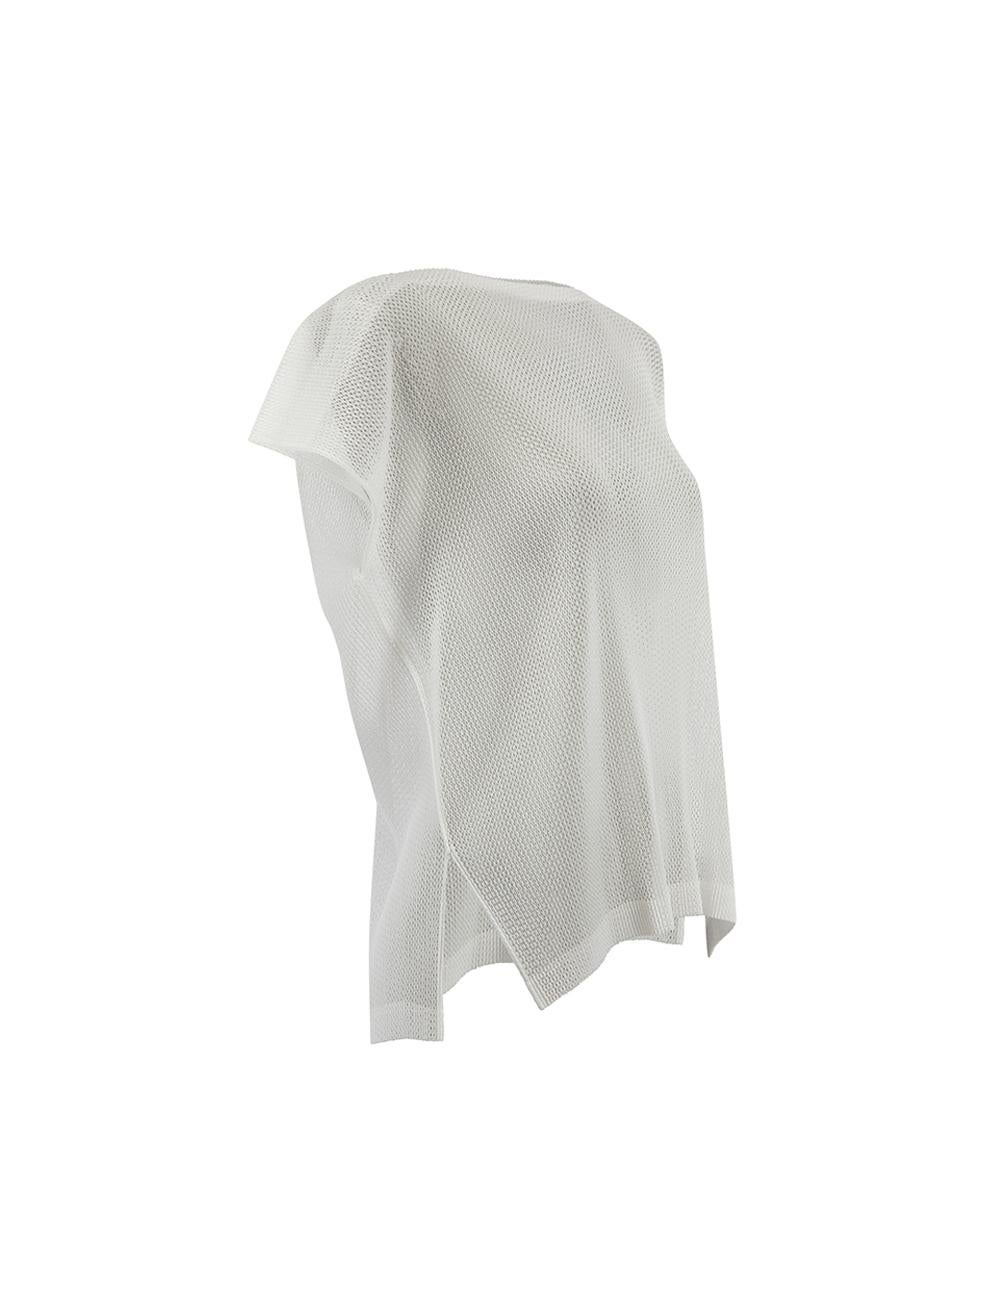 CONDITION is Never worn. No visible wear to top is evident on this used Pleats Please Issey Miyake designer resale item.
 
 Details
  White
 Polyester
 Mesh top
 Short cap sleeves
 Boat neckline
 
 
 Made in Japan
 
 Composition
 100% Polyester
 
